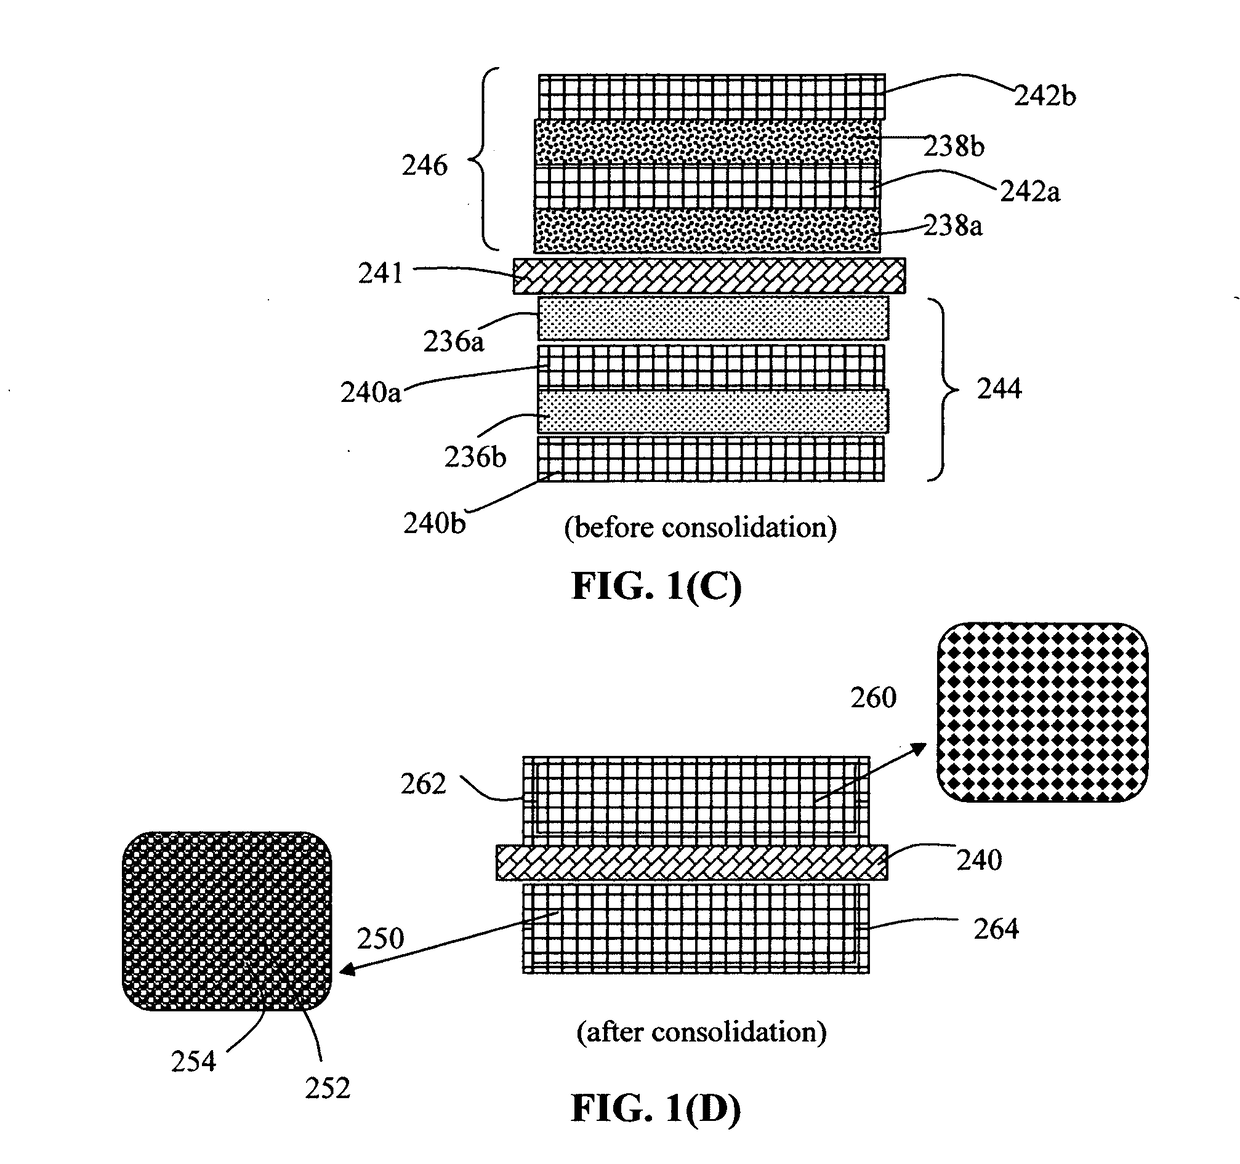 Process for producing lithium batteries having an ultra-high energy density